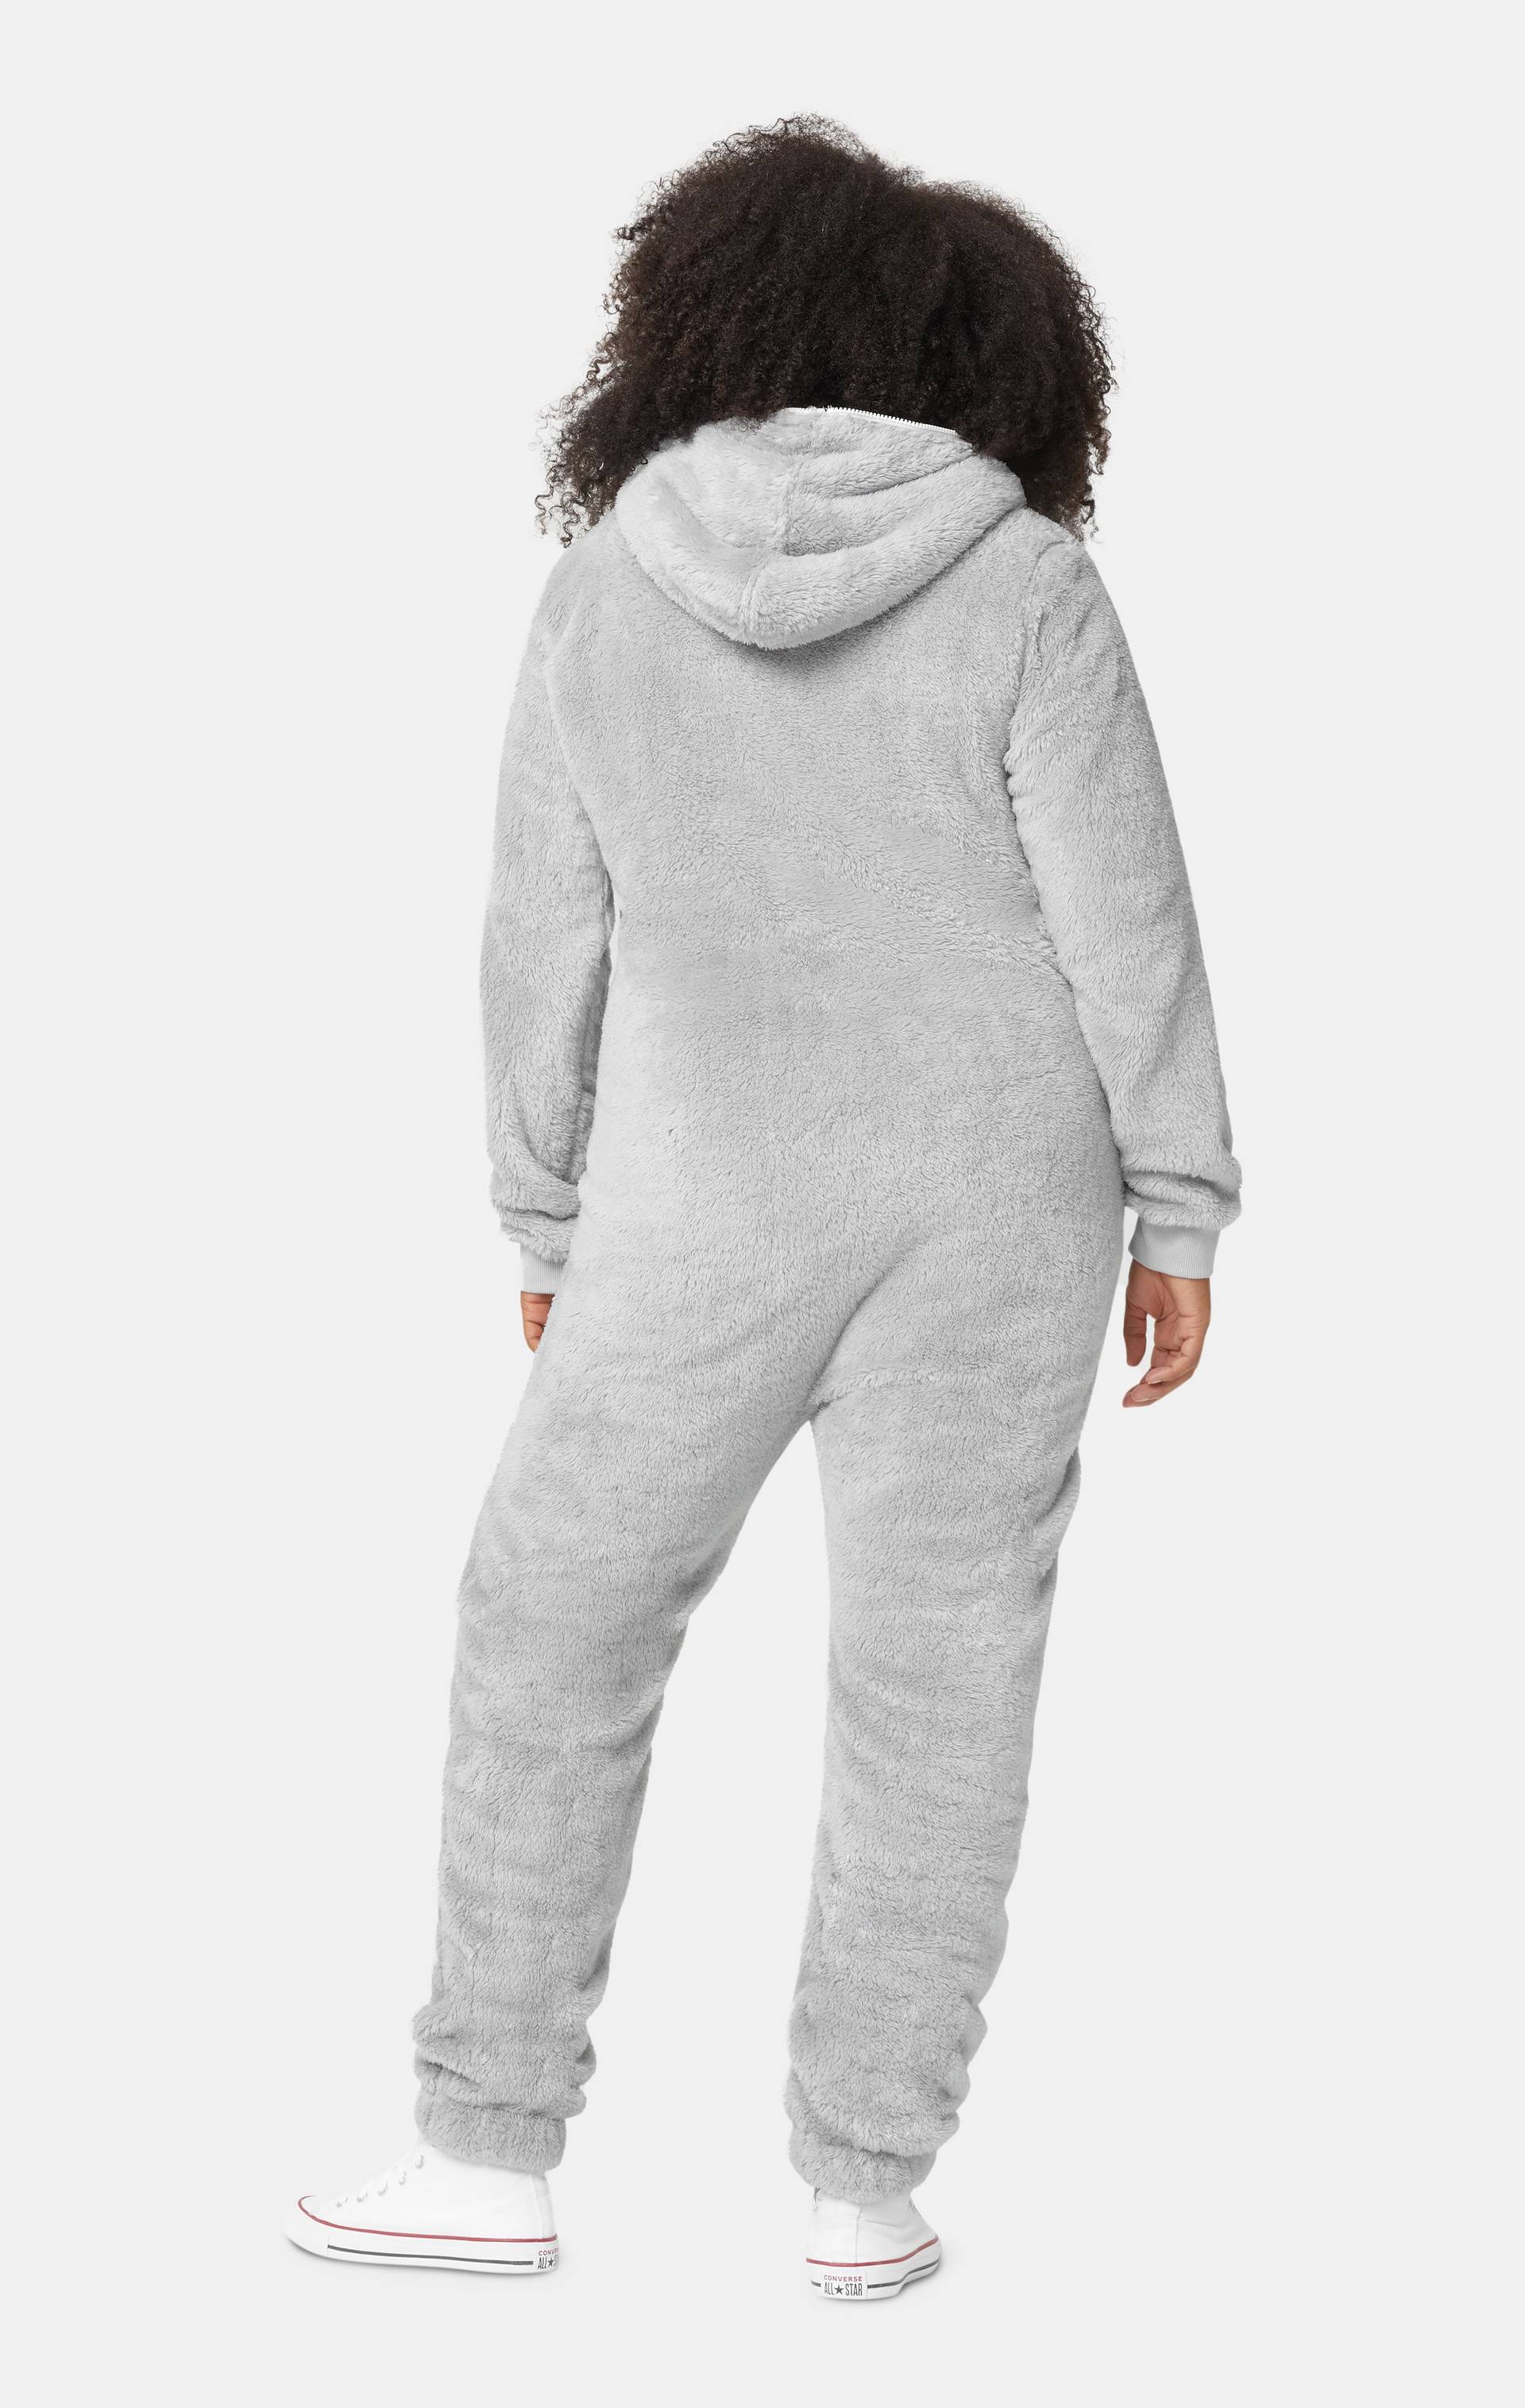 Onepiece The Puppy Jumpsuit Light Grey - 15